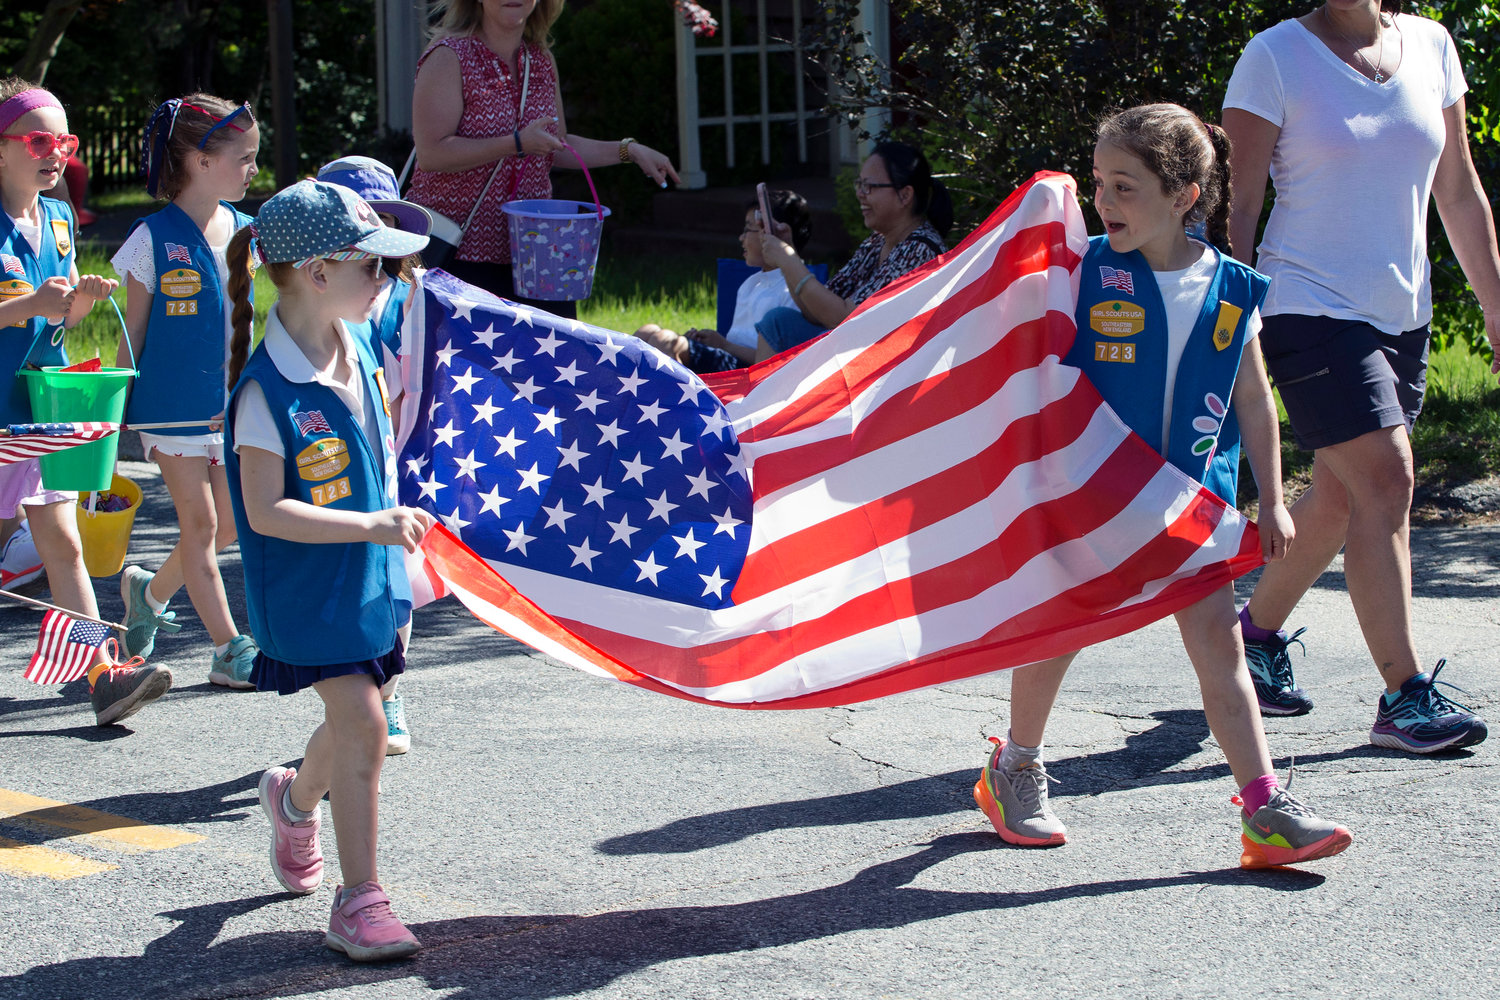 Members of Barrington Daisy Troop 723 carry an American flag through the Memorial Day parade route a previous year.